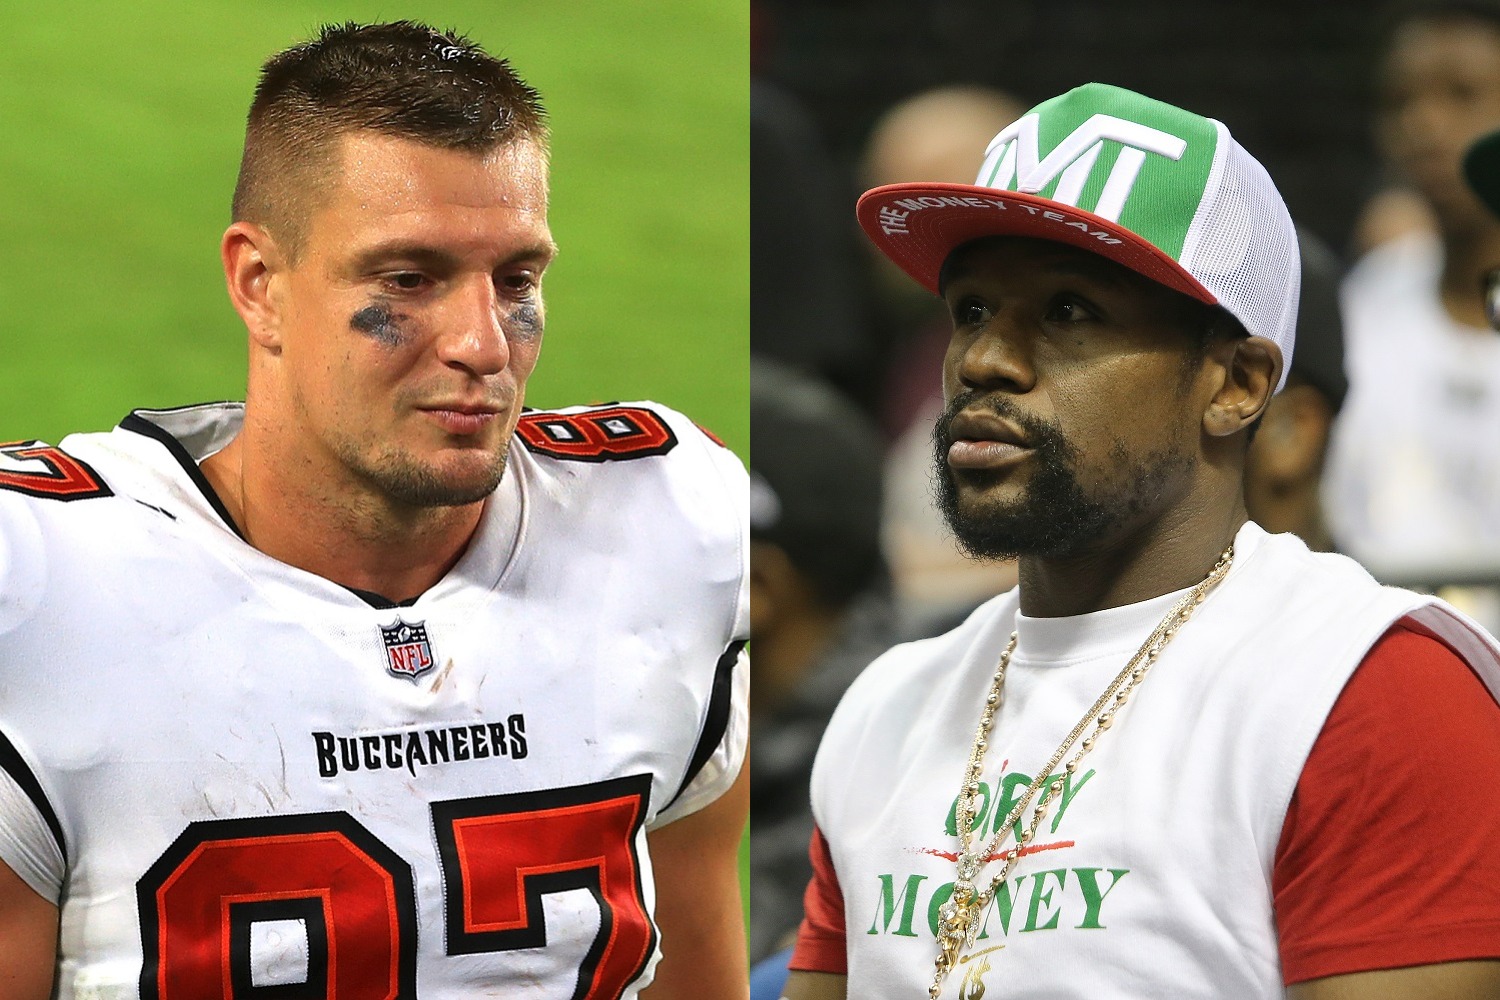 Rob Gronkowski and Floyd Mayweather Face a Surprising $5 Million Lawsuit